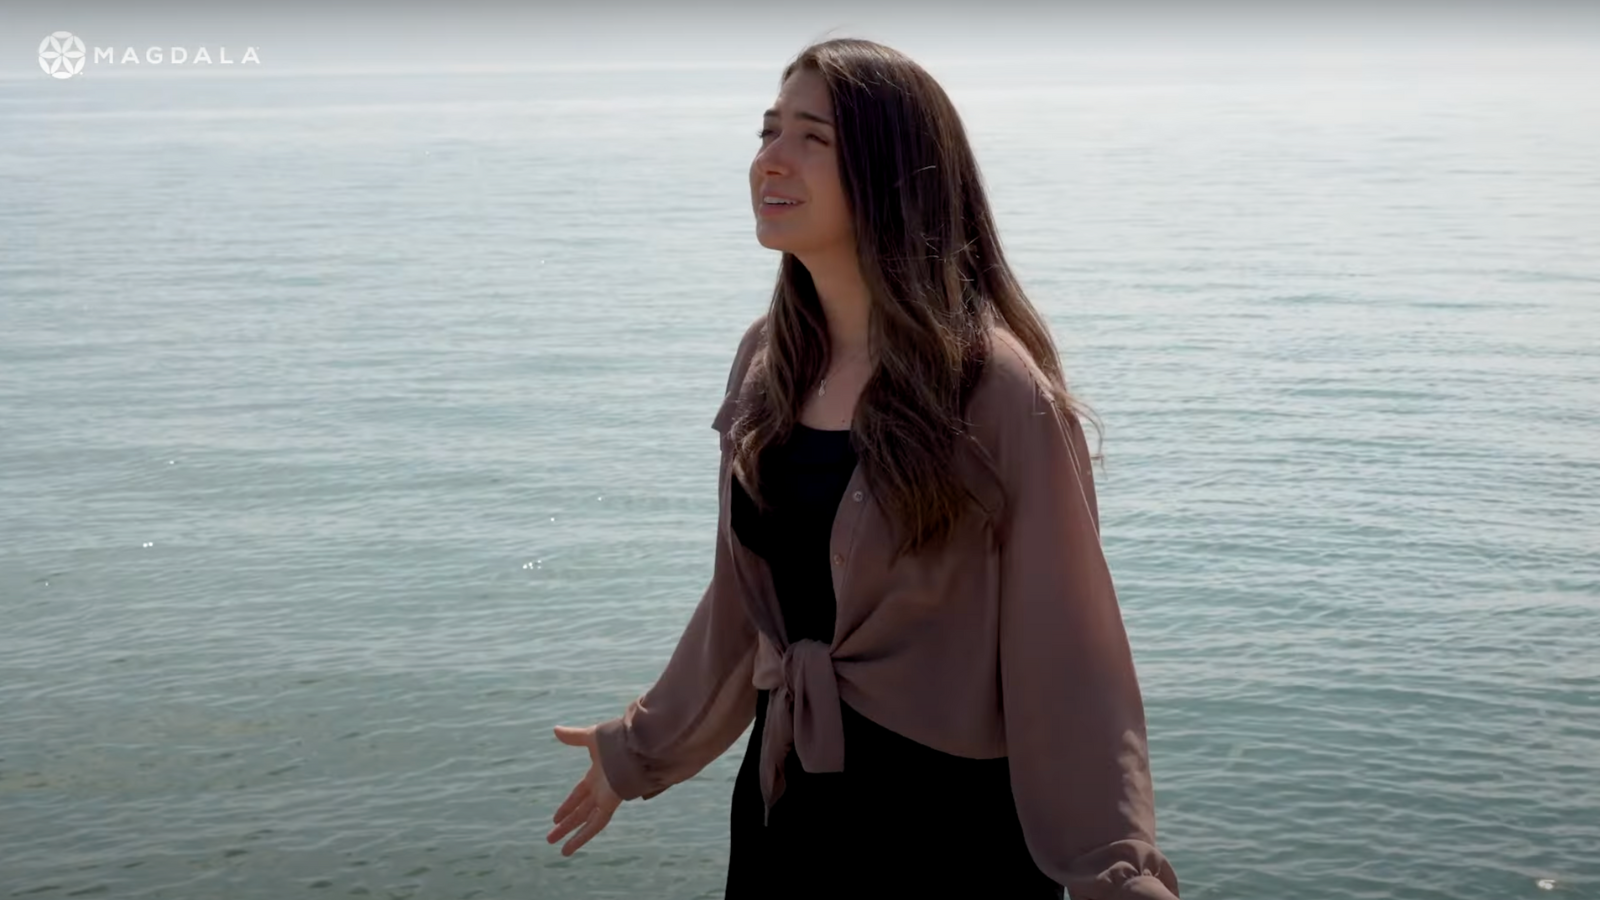 “New Life” – Music About Mary Magdalene and Her Encounter with Jesus